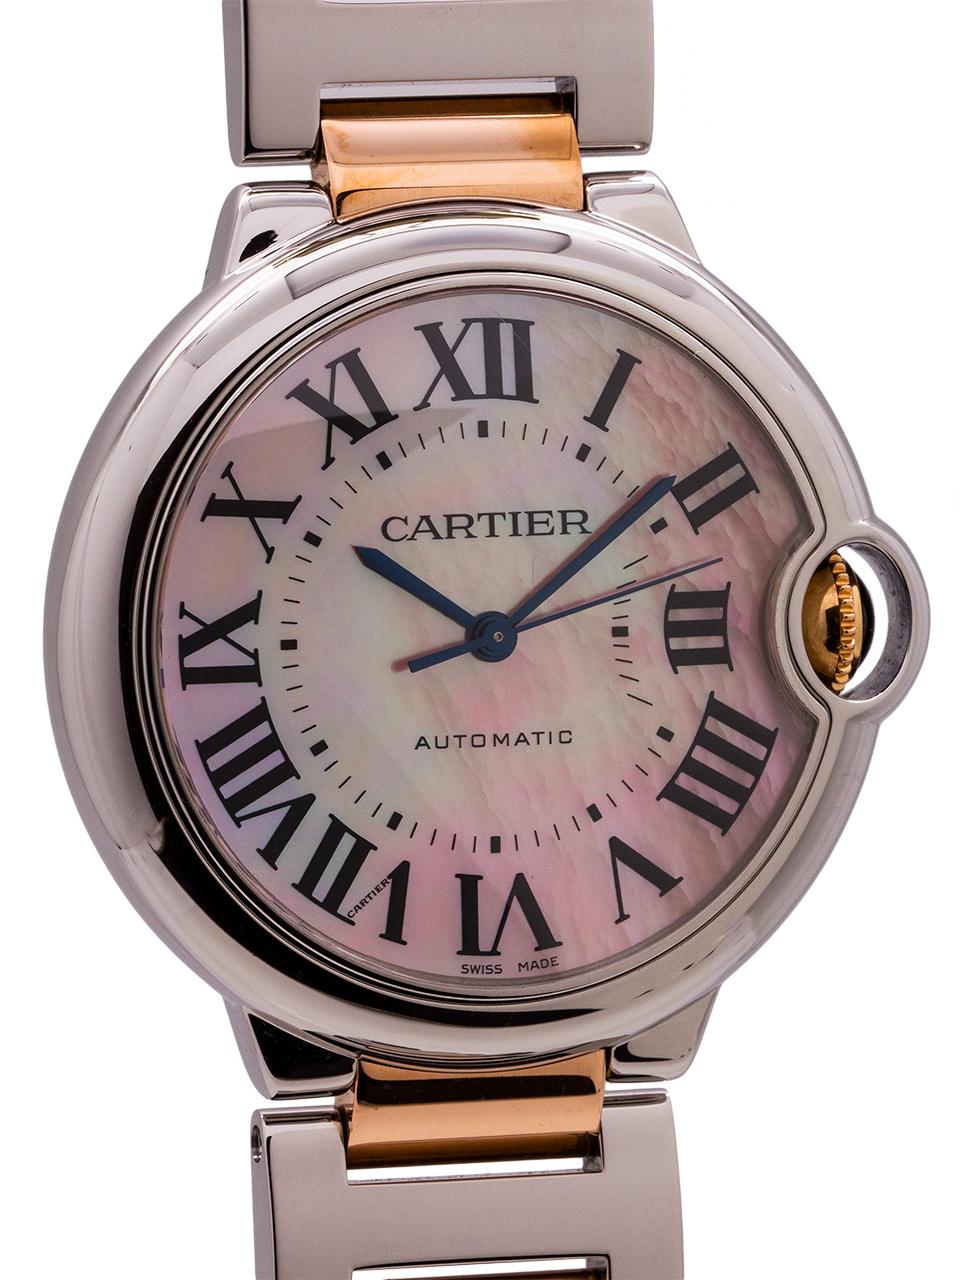 
Cartier stainless steel and pink gold 36mm diameter Ballon Blue circa 2000’s. Featuring pink mother of pearl (MOP) guilloche dial with large printed black Roman numerals and blue steeled hands. Powered by self winding Cartier movement with sweep